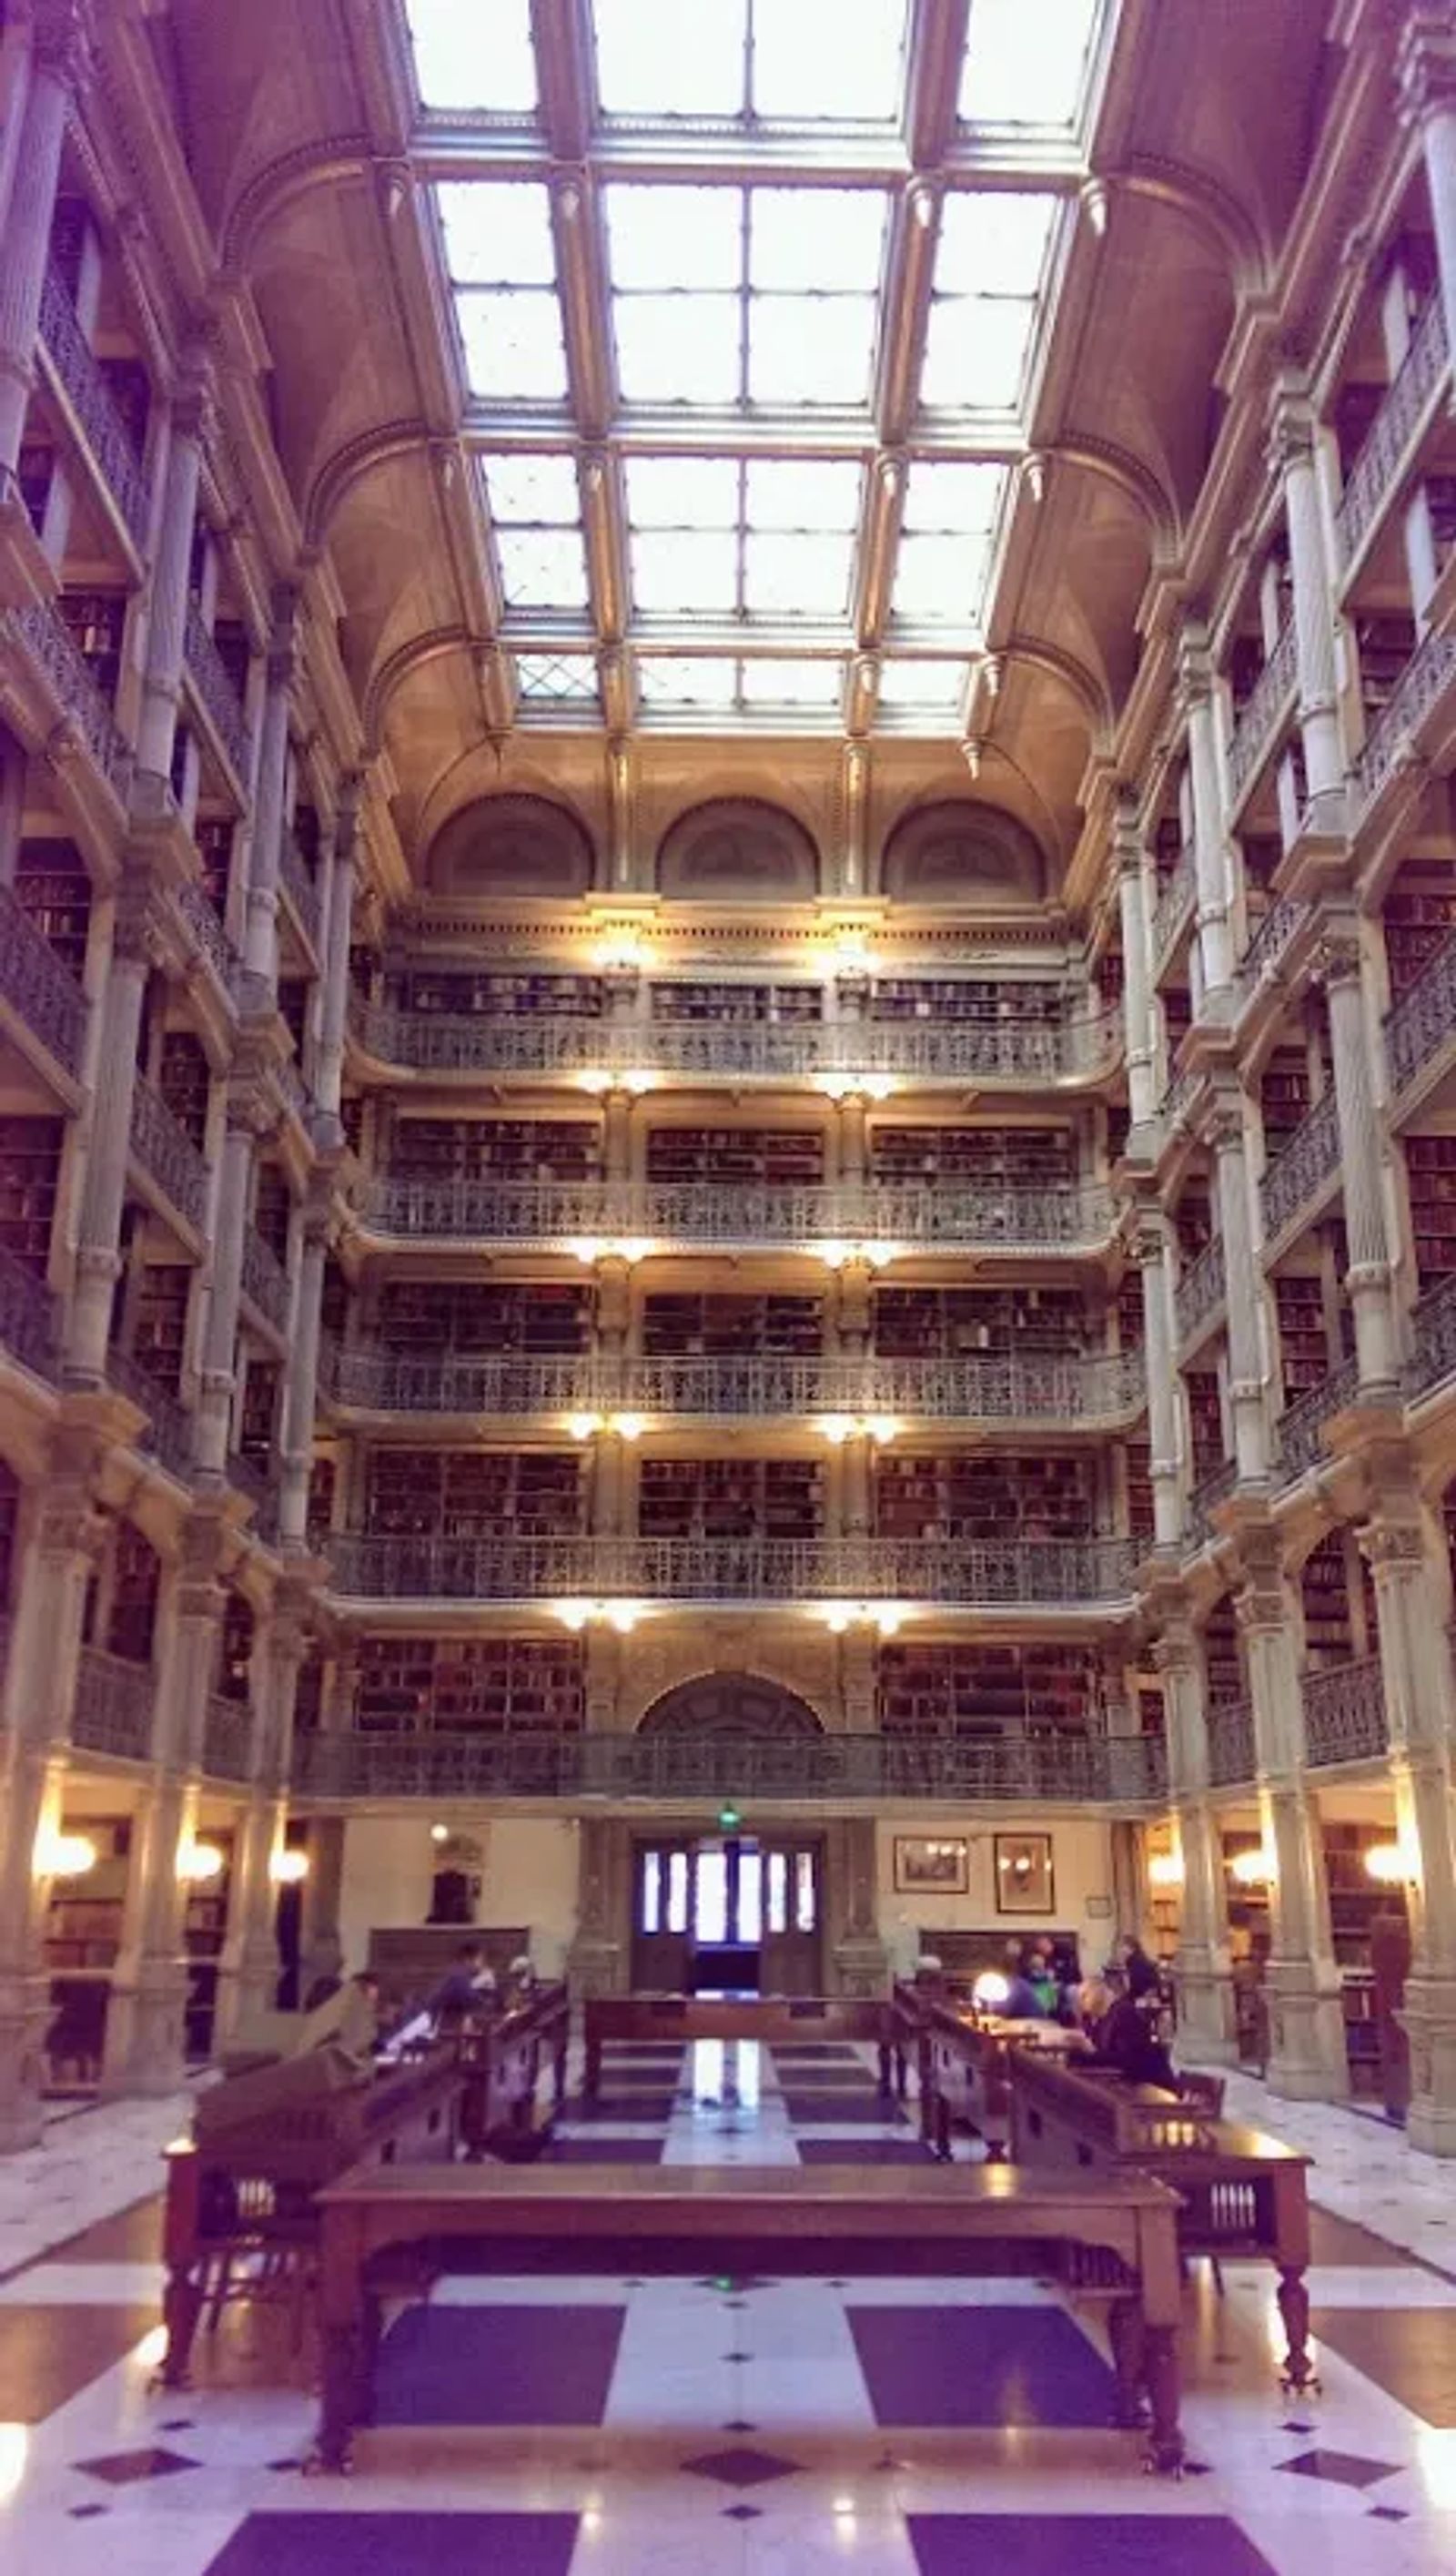 Photo of the George Peabody Library reading room in Baltimore, Maryland